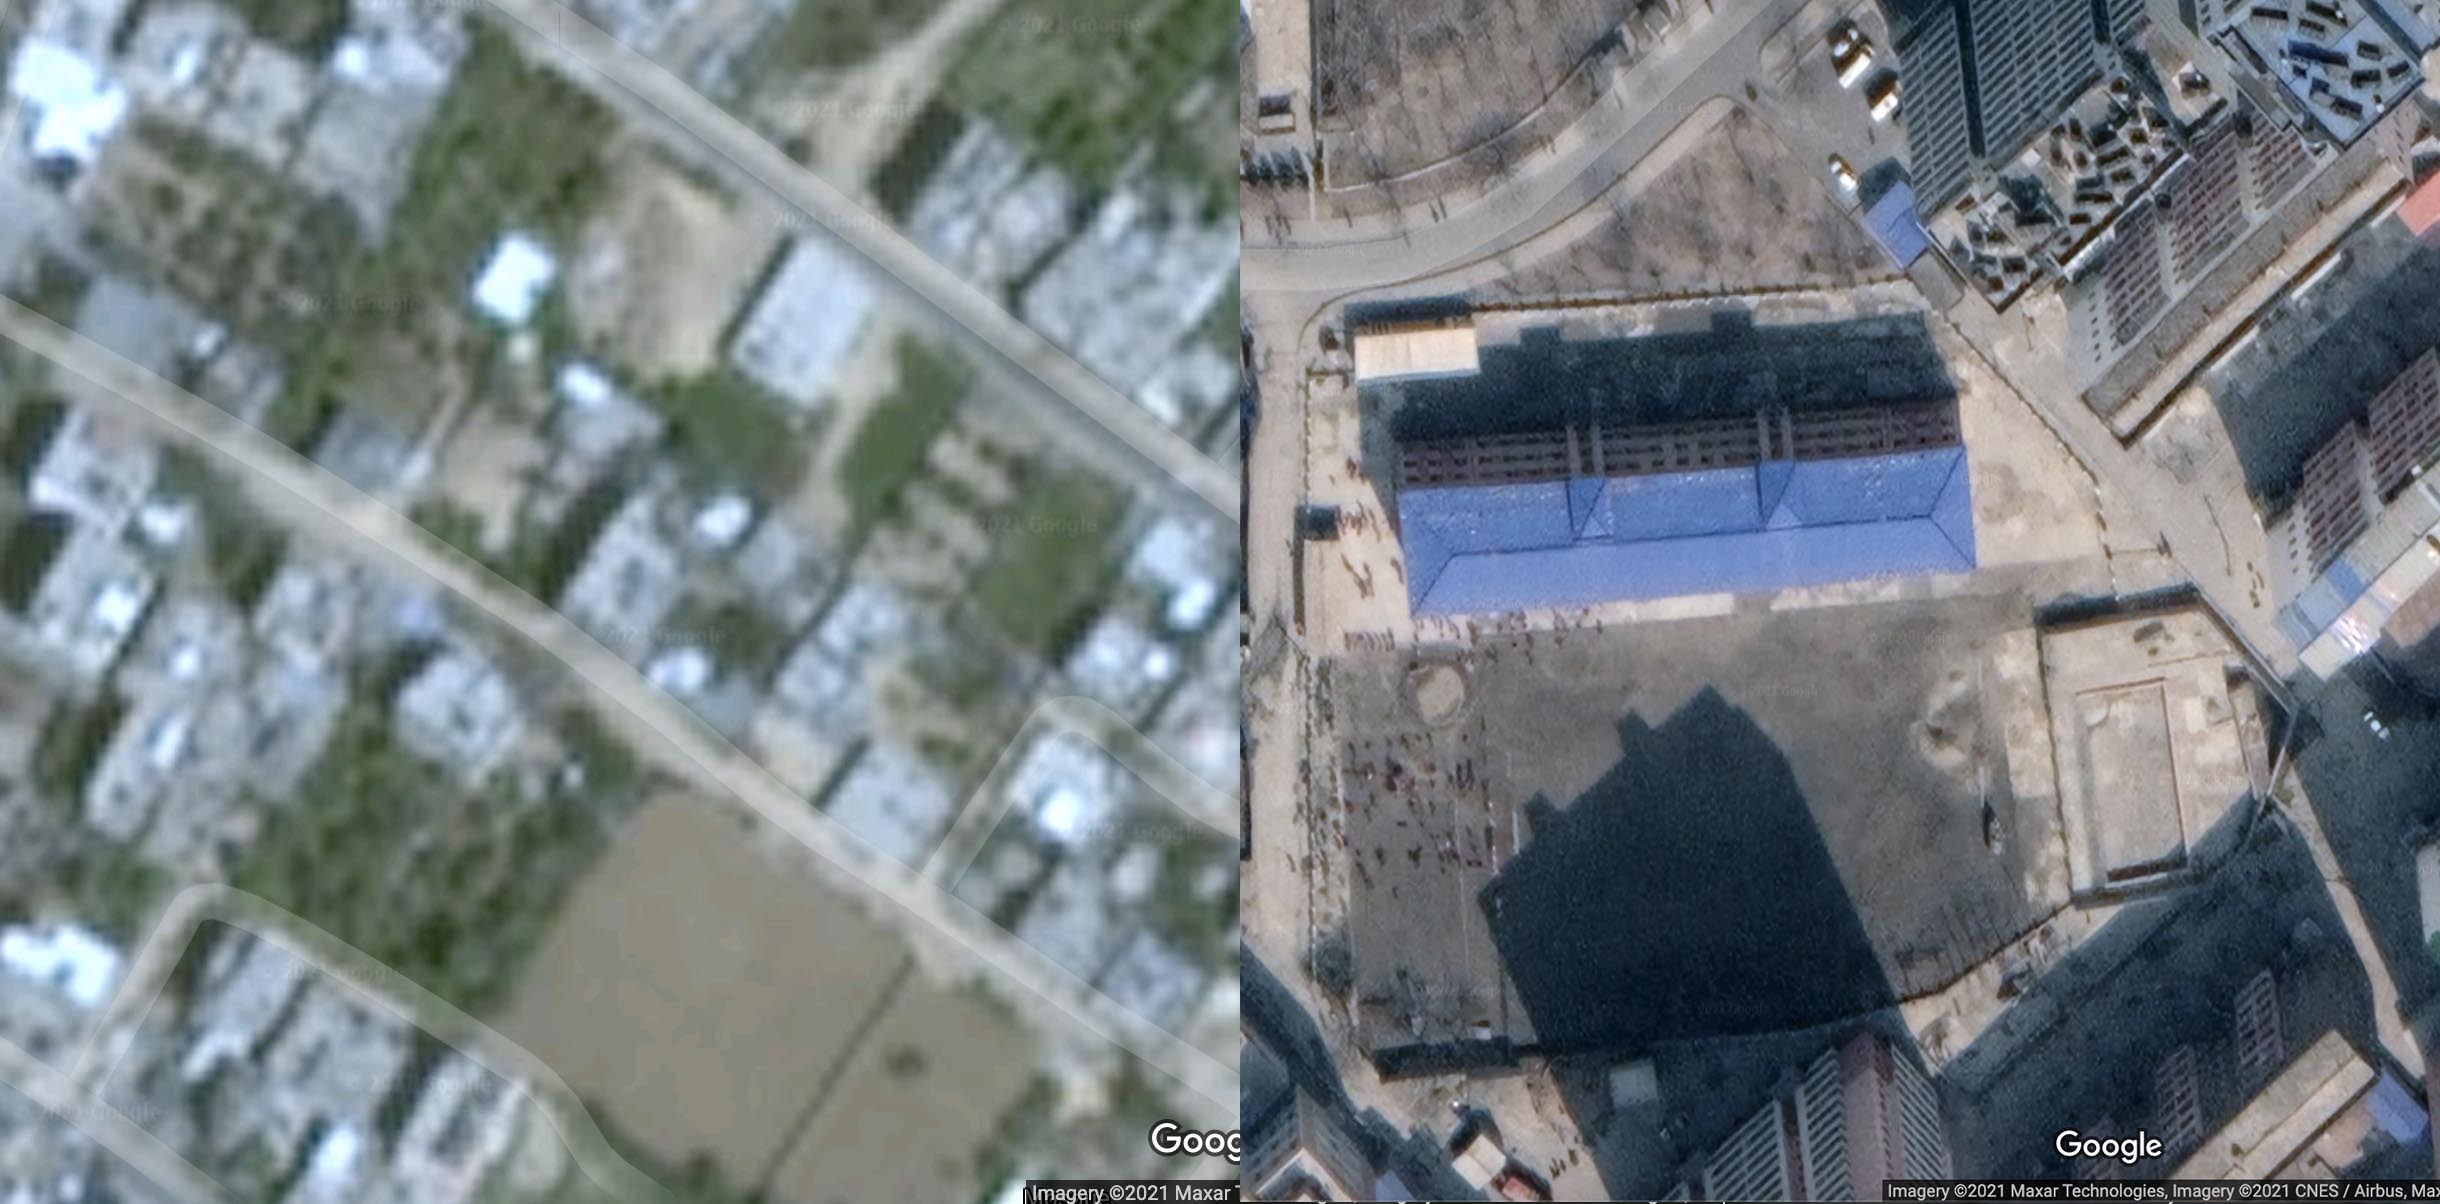 Khan Yunis in the Gaza Strip (L) and Pyongyang, North Korea (R) as shown on Google Maps